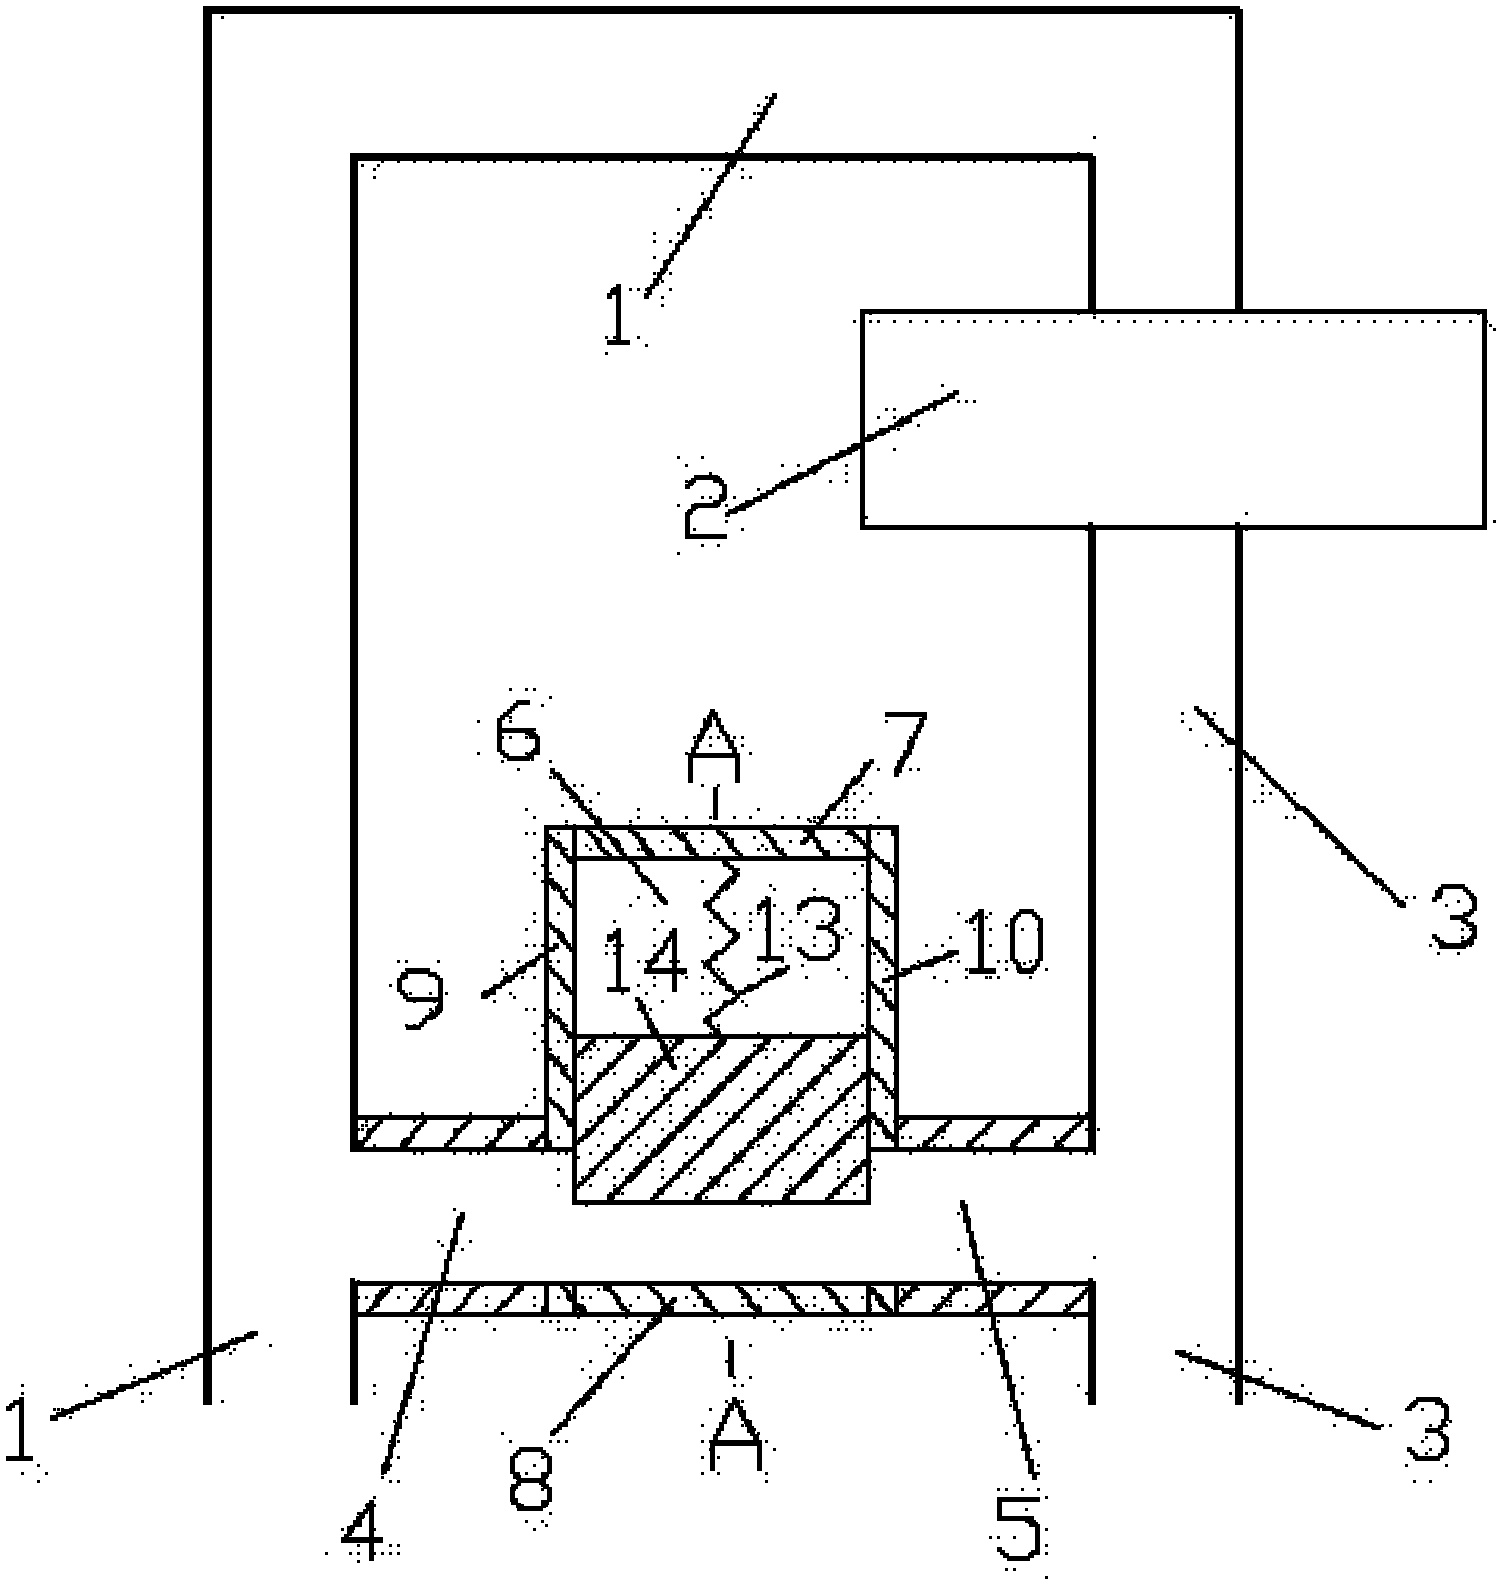 Exhaust-gas recirculating system with volume cavity